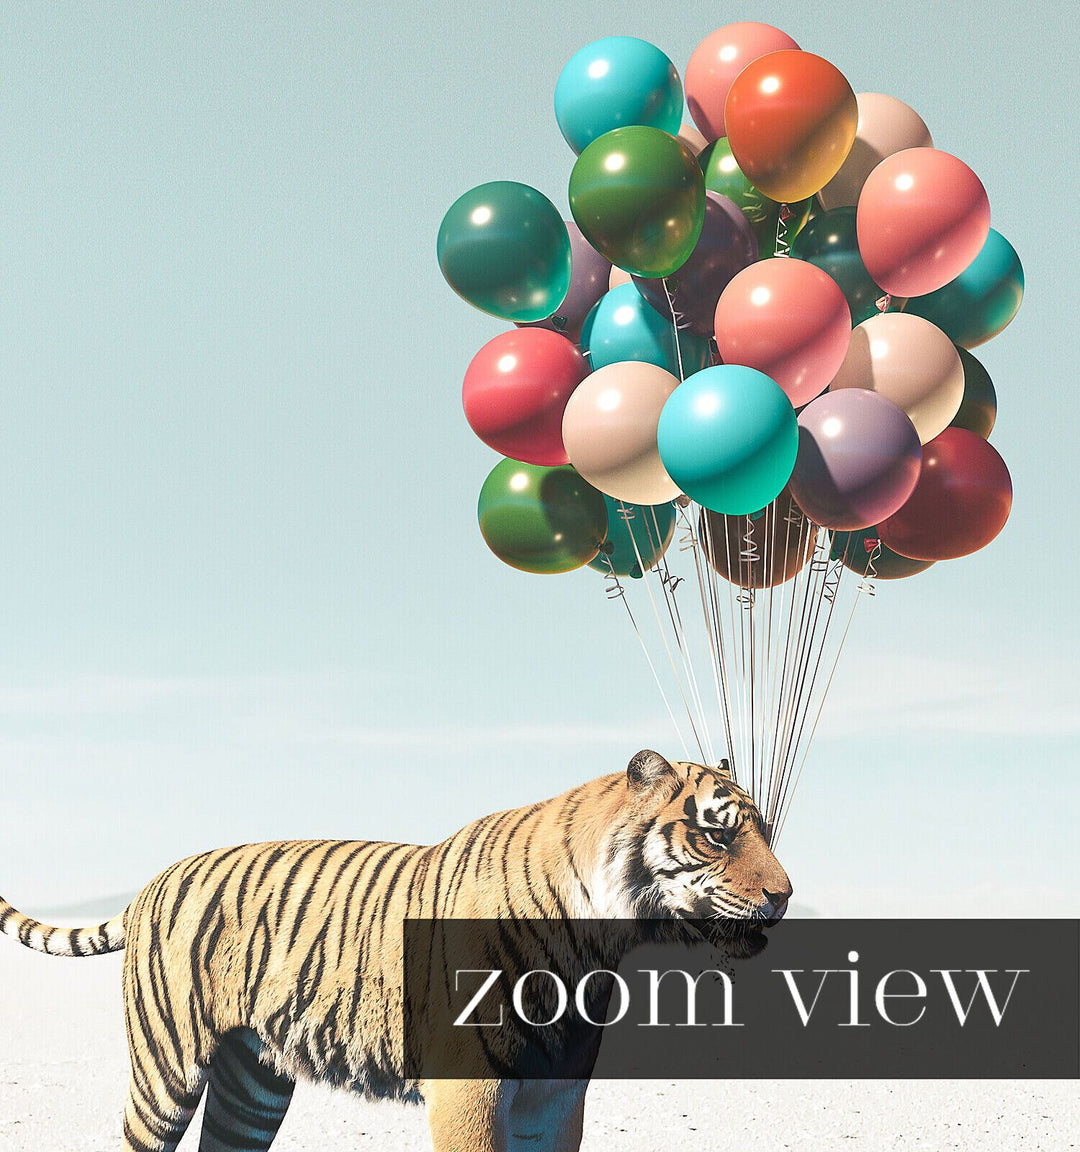 Tiger with Balloons Art Print